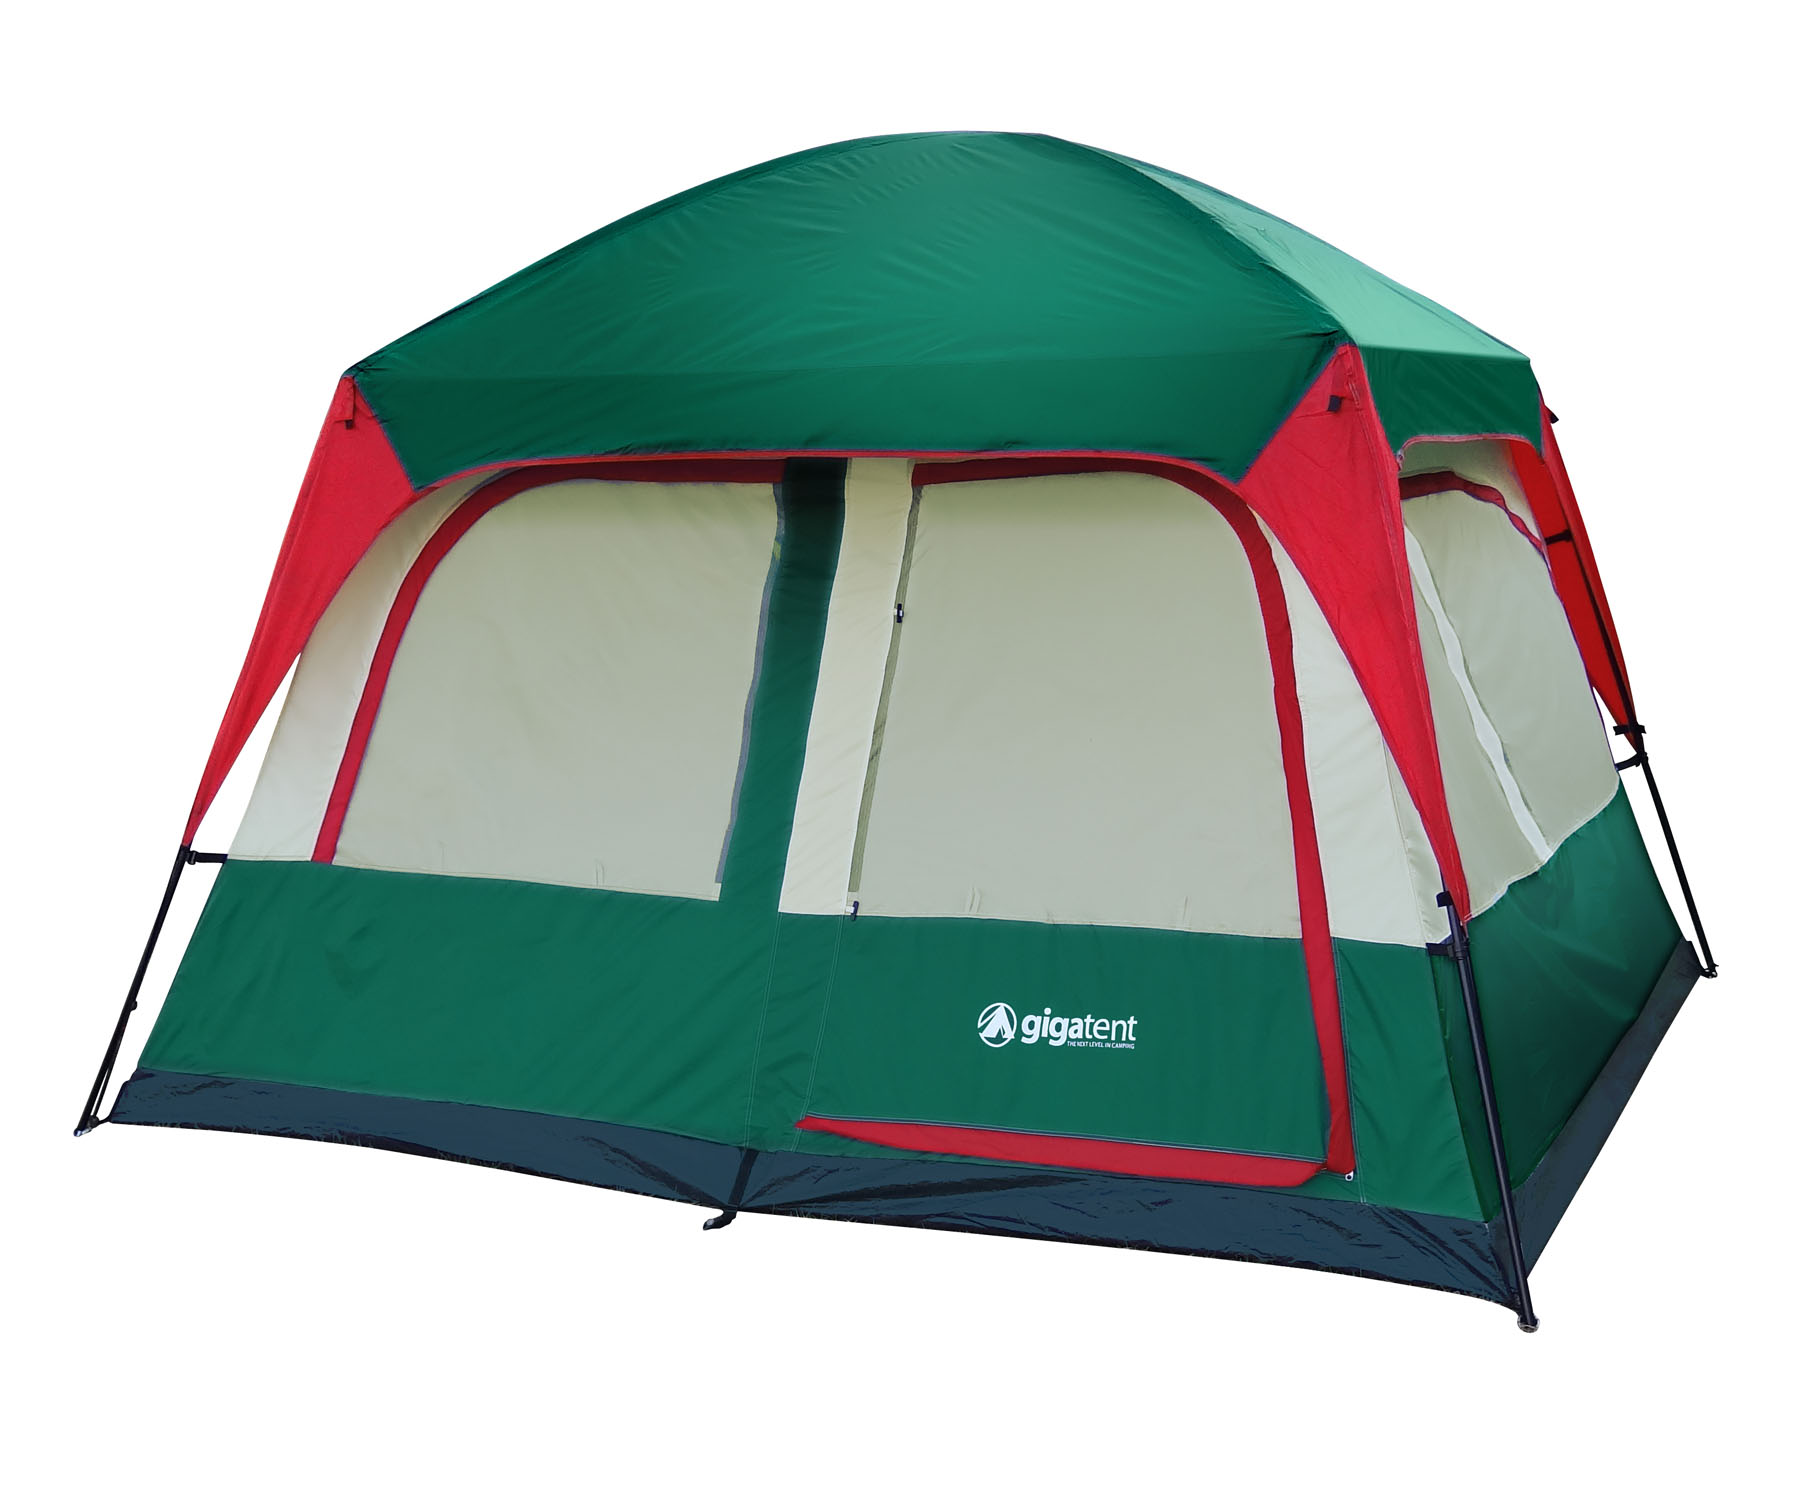 Gigatent Prospect Rock 4-5 Person Family Camping Tent - image 1 of 5